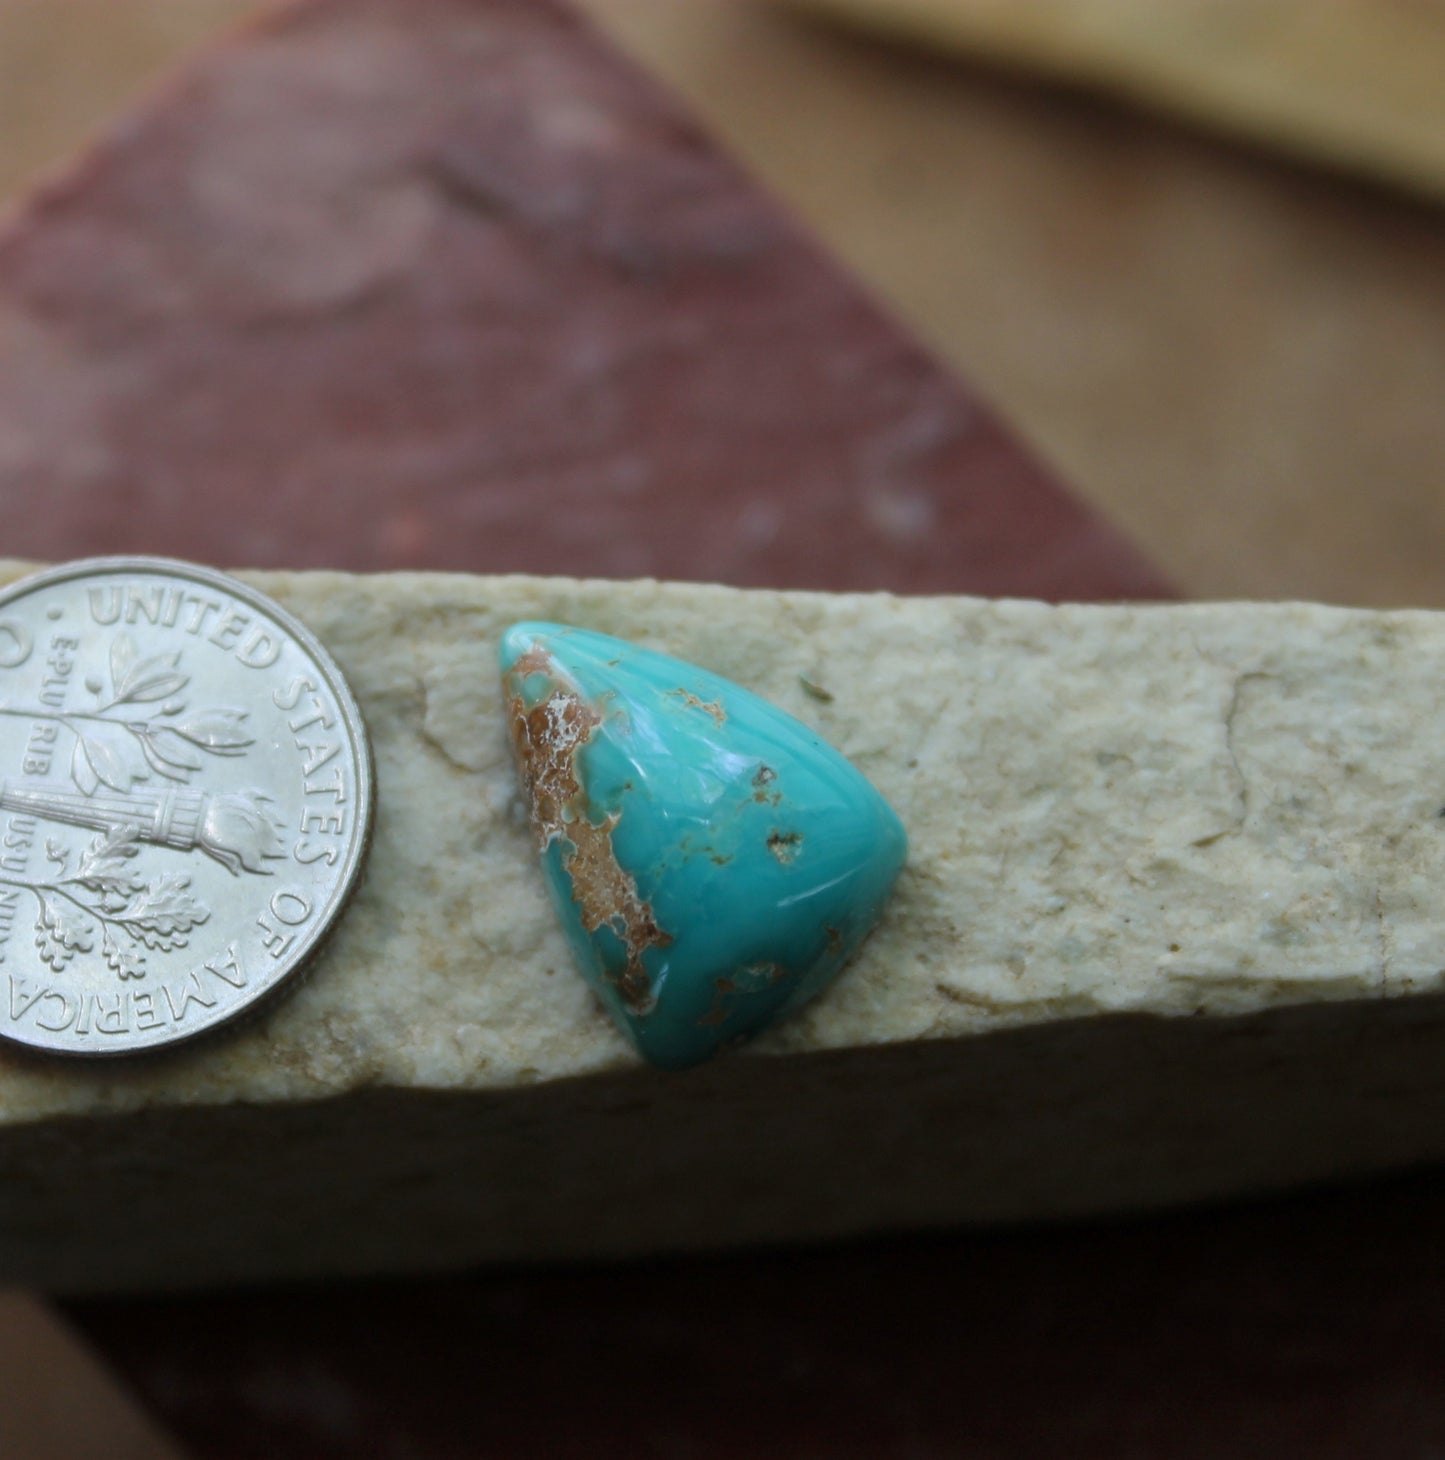 7 carat blue Stone Mountain Turquoise cabochon with a high dome